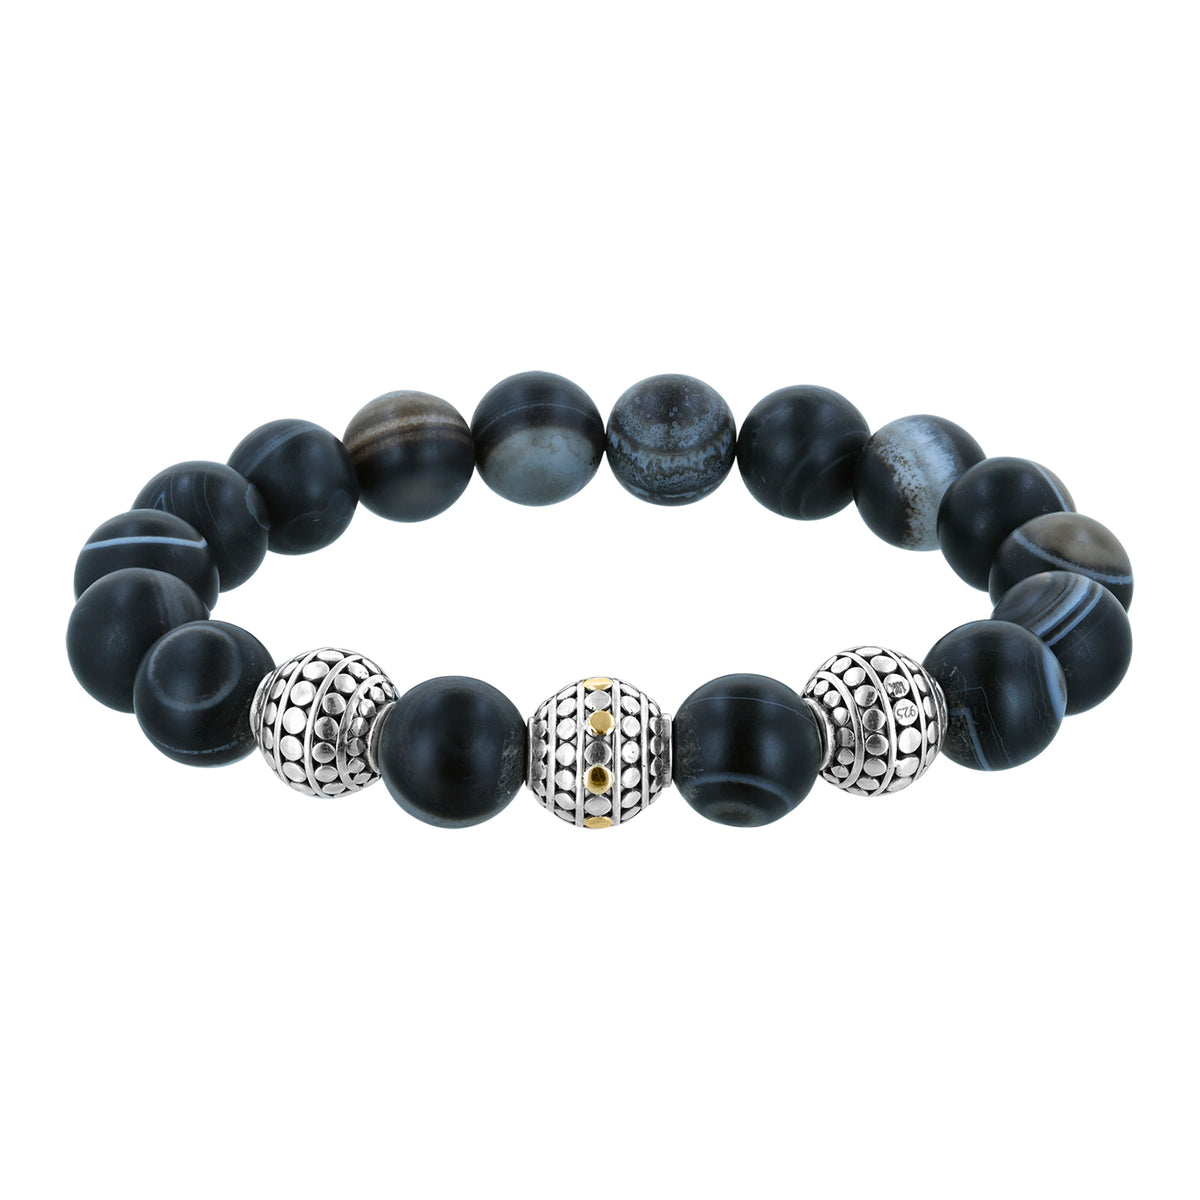 Bali Black Line Agate and Sterling Silver Beaded Stretch Bracelet with ...